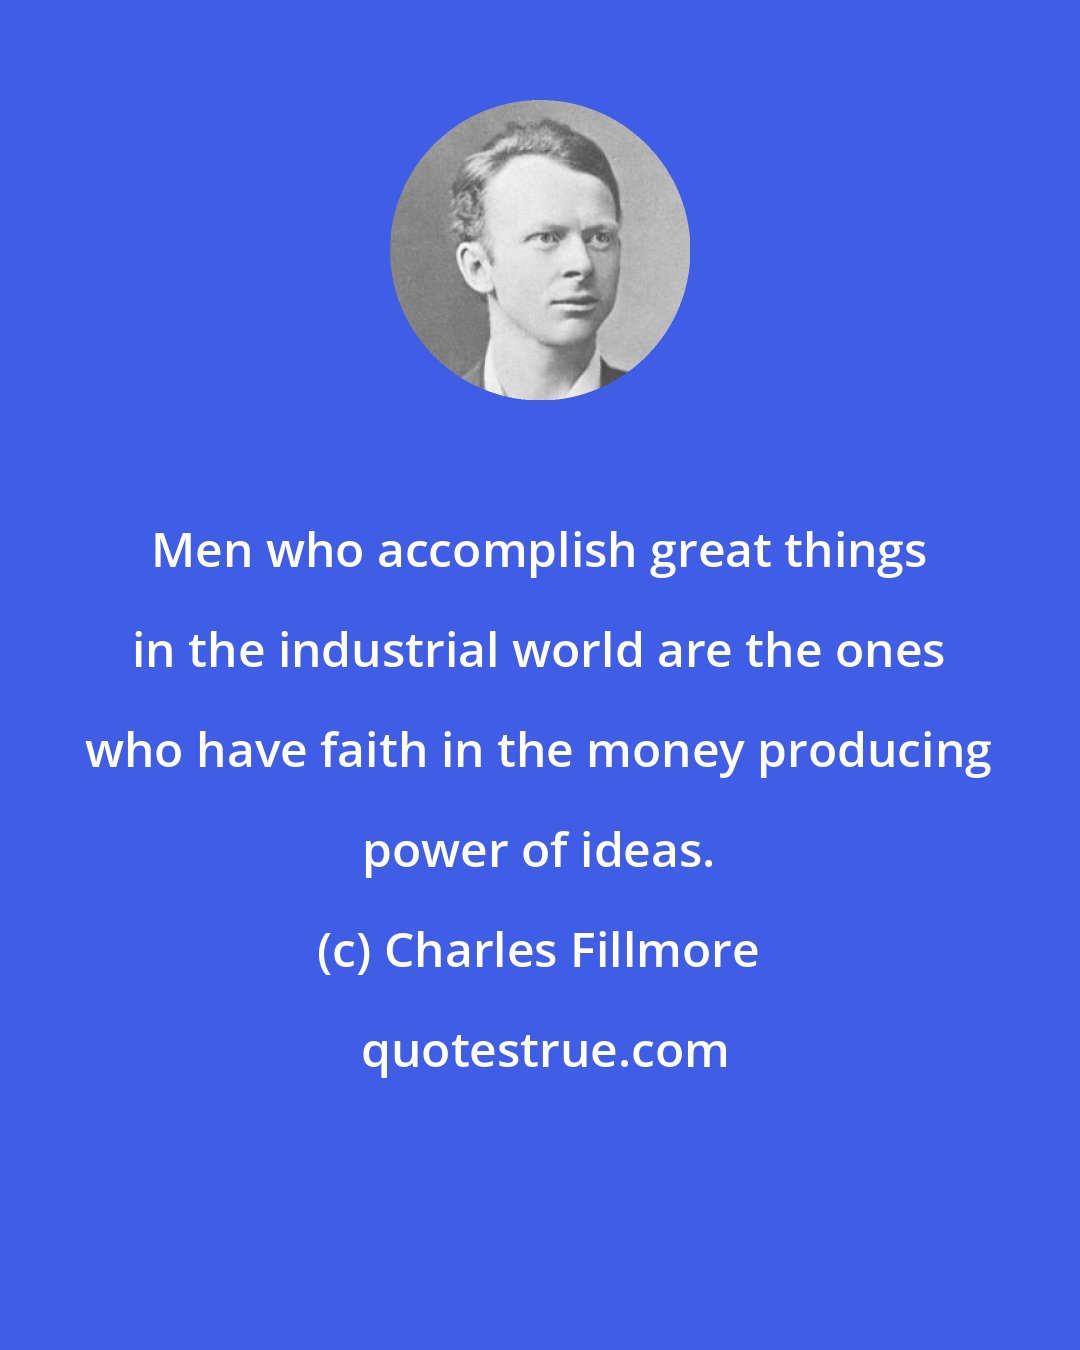 Charles Fillmore: Men who accomplish great things in the industrial world are the ones who have faith in the money producing power of ideas.